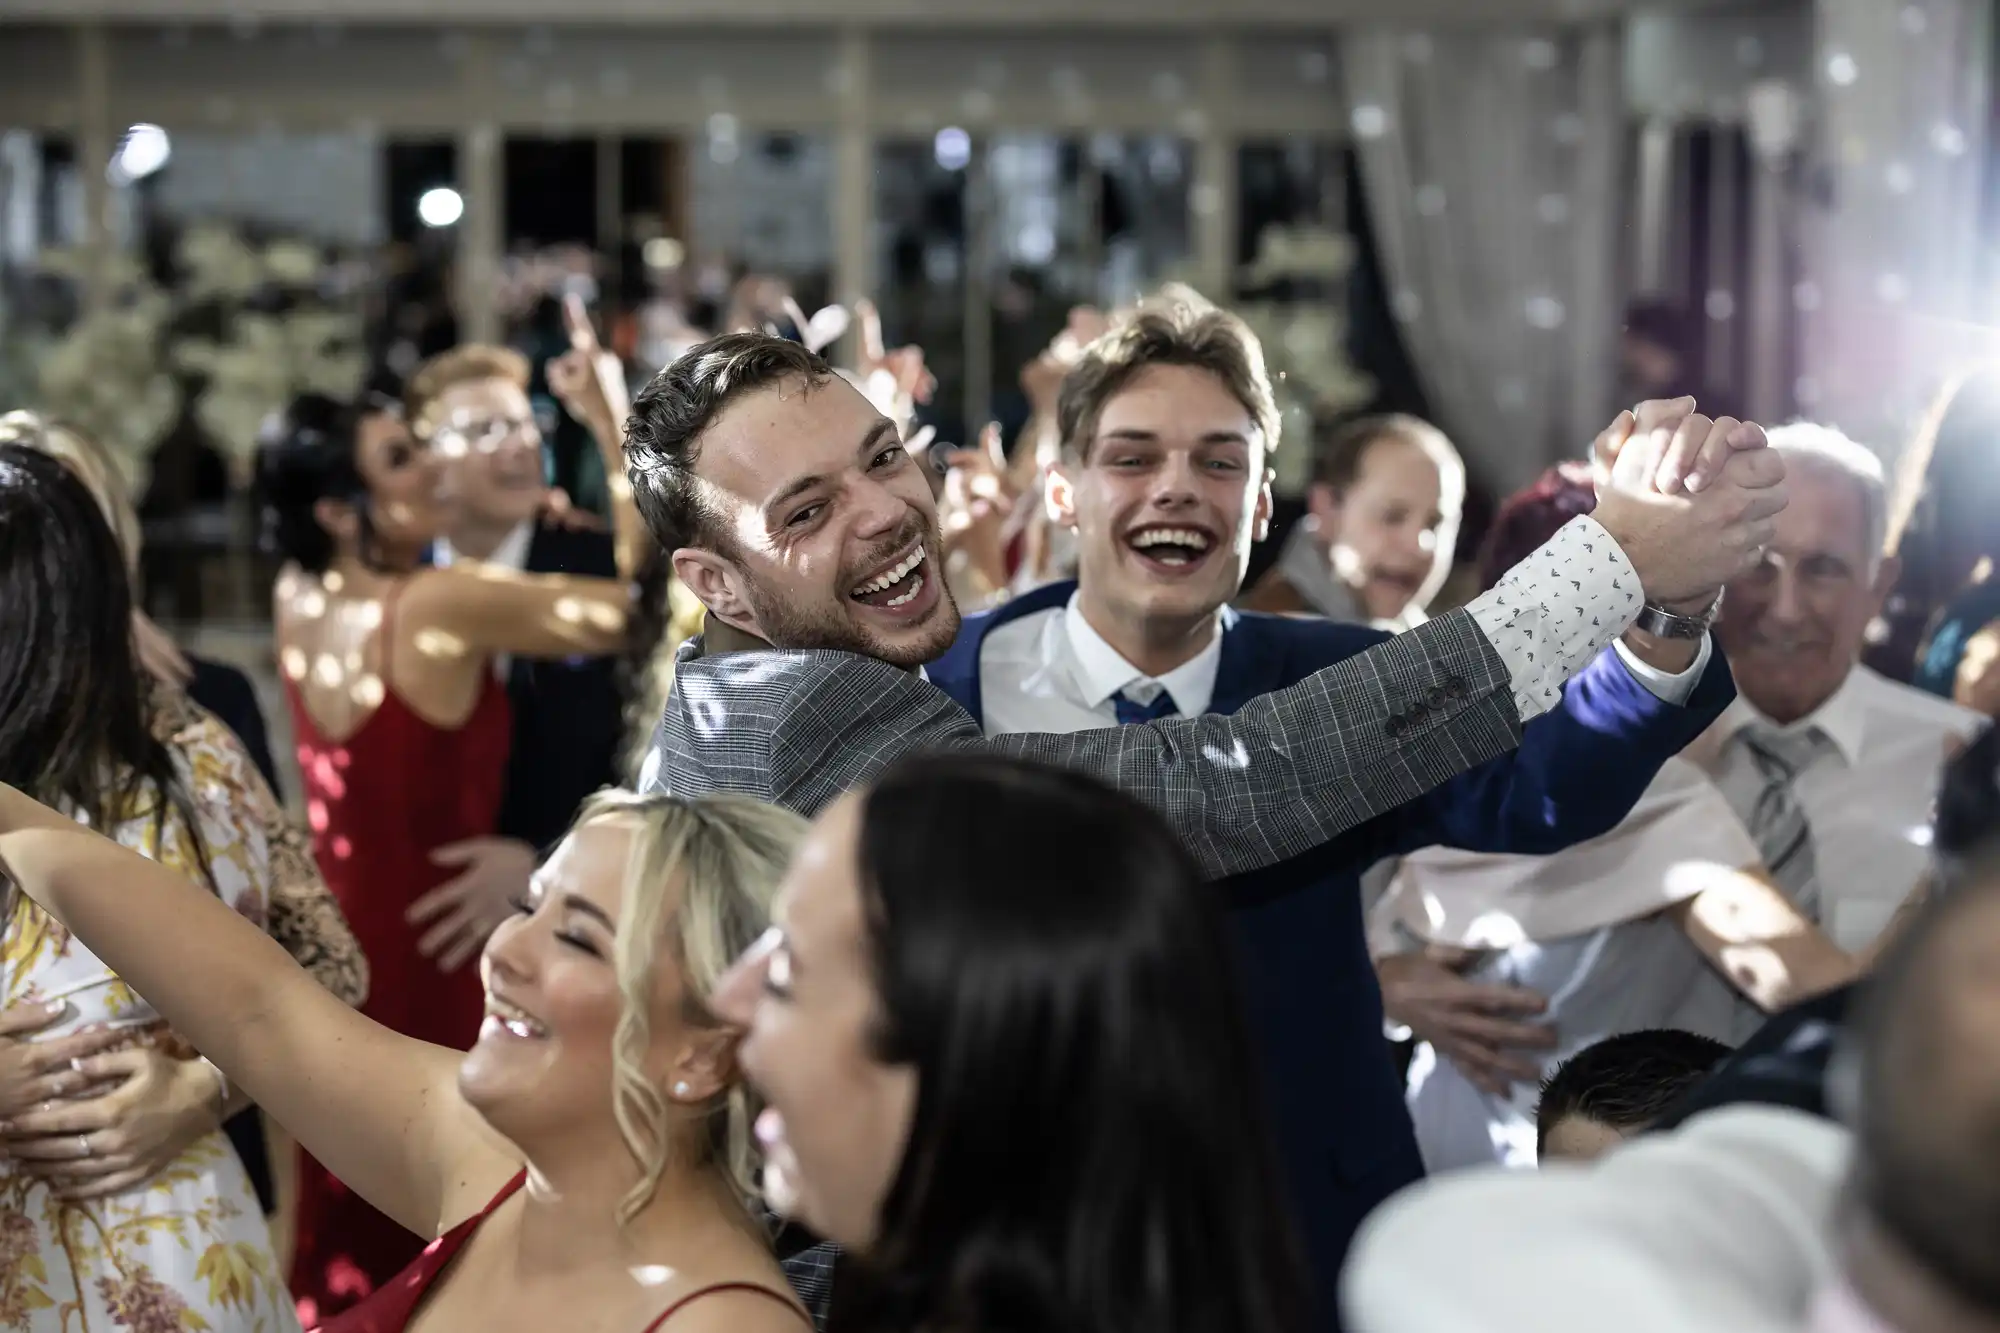 A group of people, including two men in suits at the center, smile and dance together in a lively indoor setting.